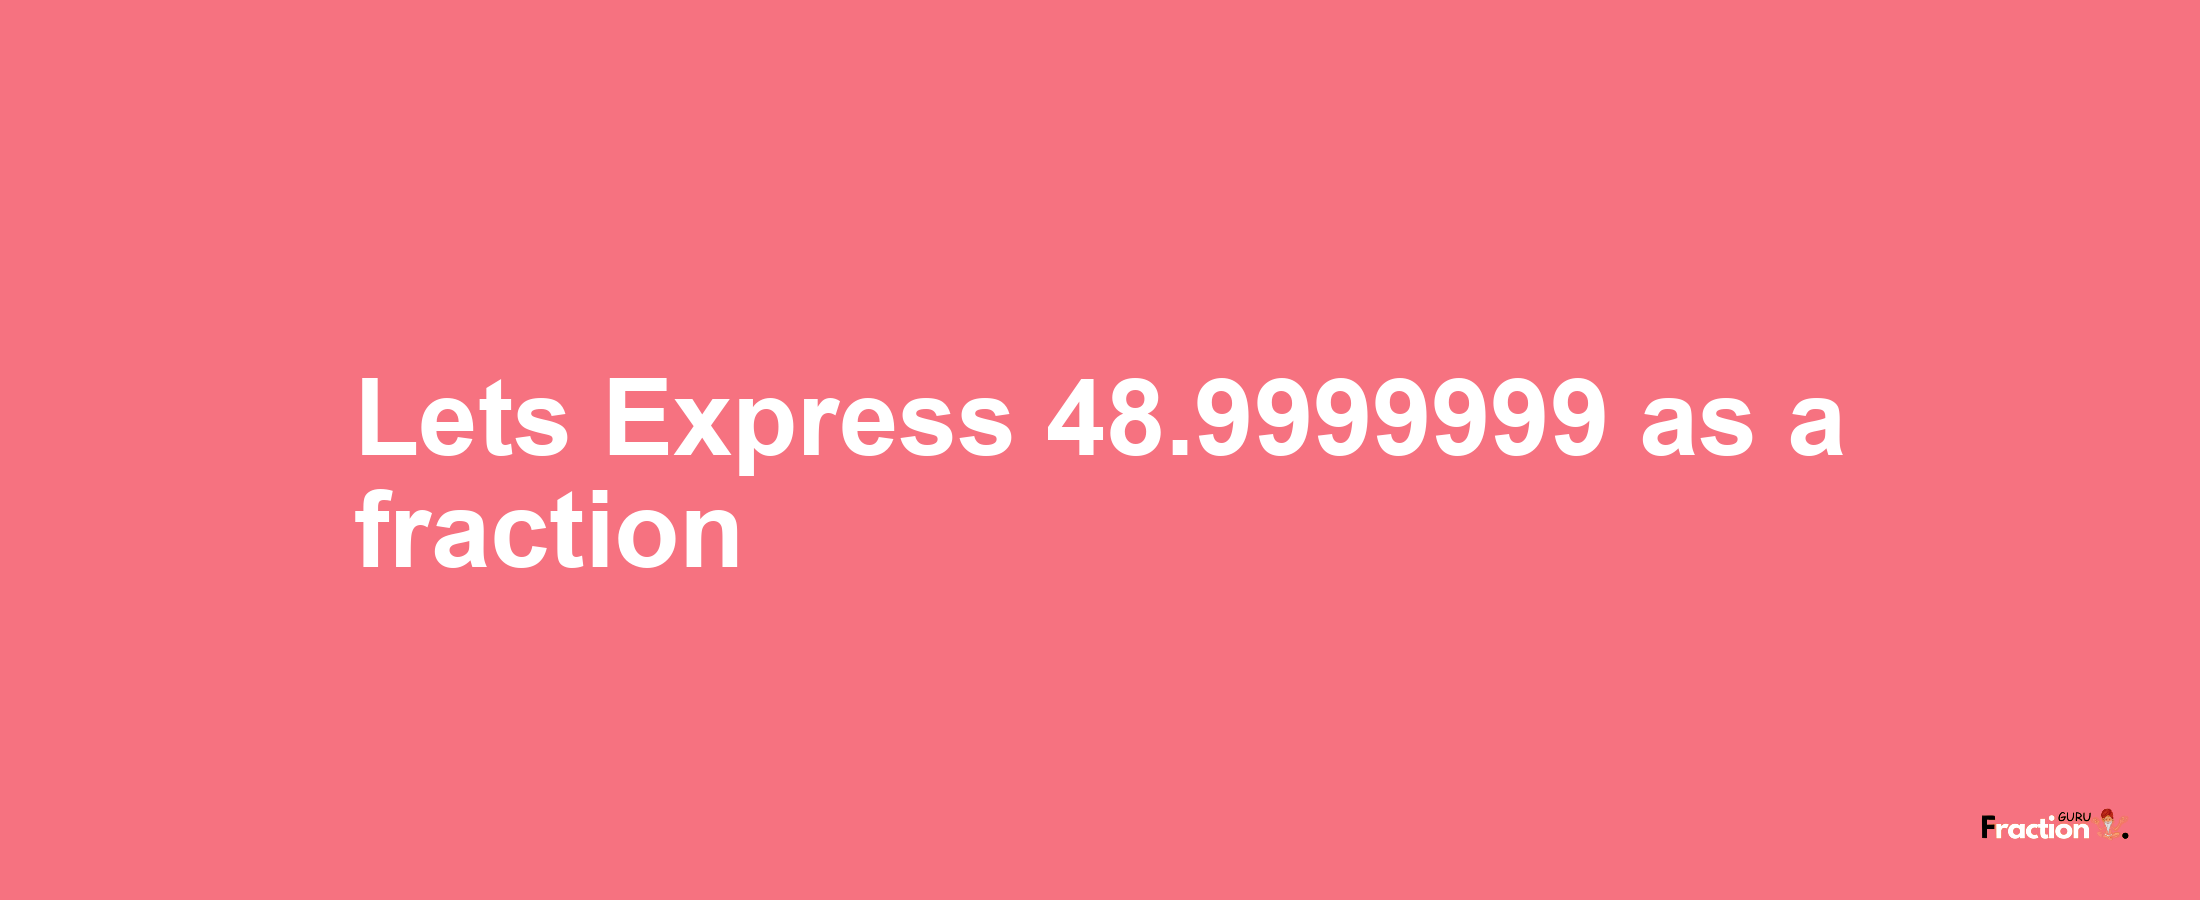 Lets Express 48.9999999 as afraction